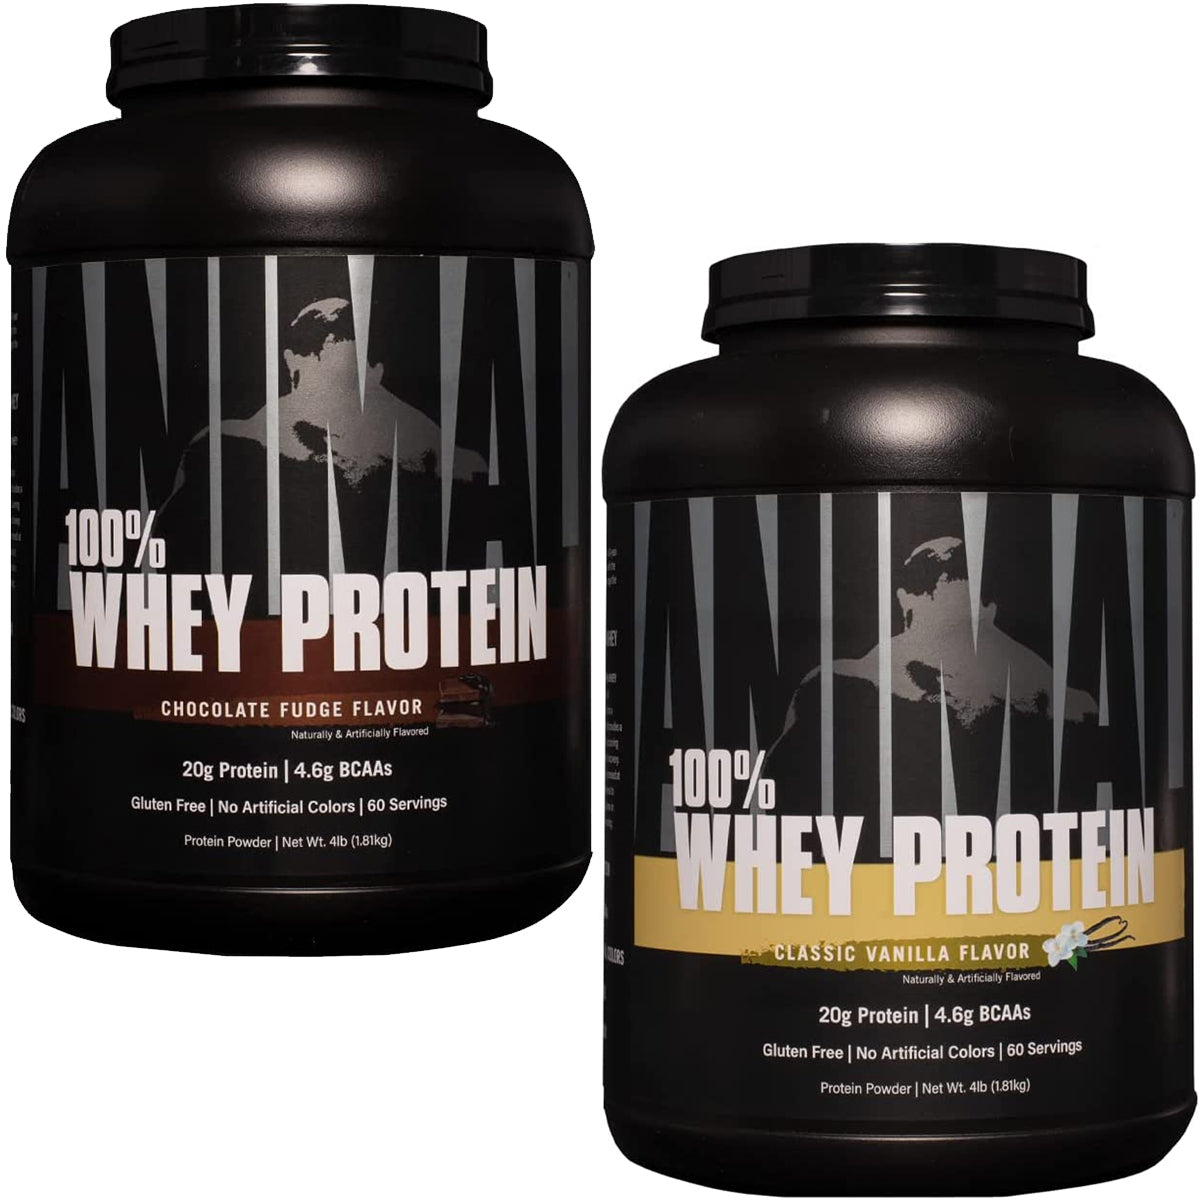 Universal Nutrition Animal 100% Whey Protein Powder - 60 Servings Universal Nutrition